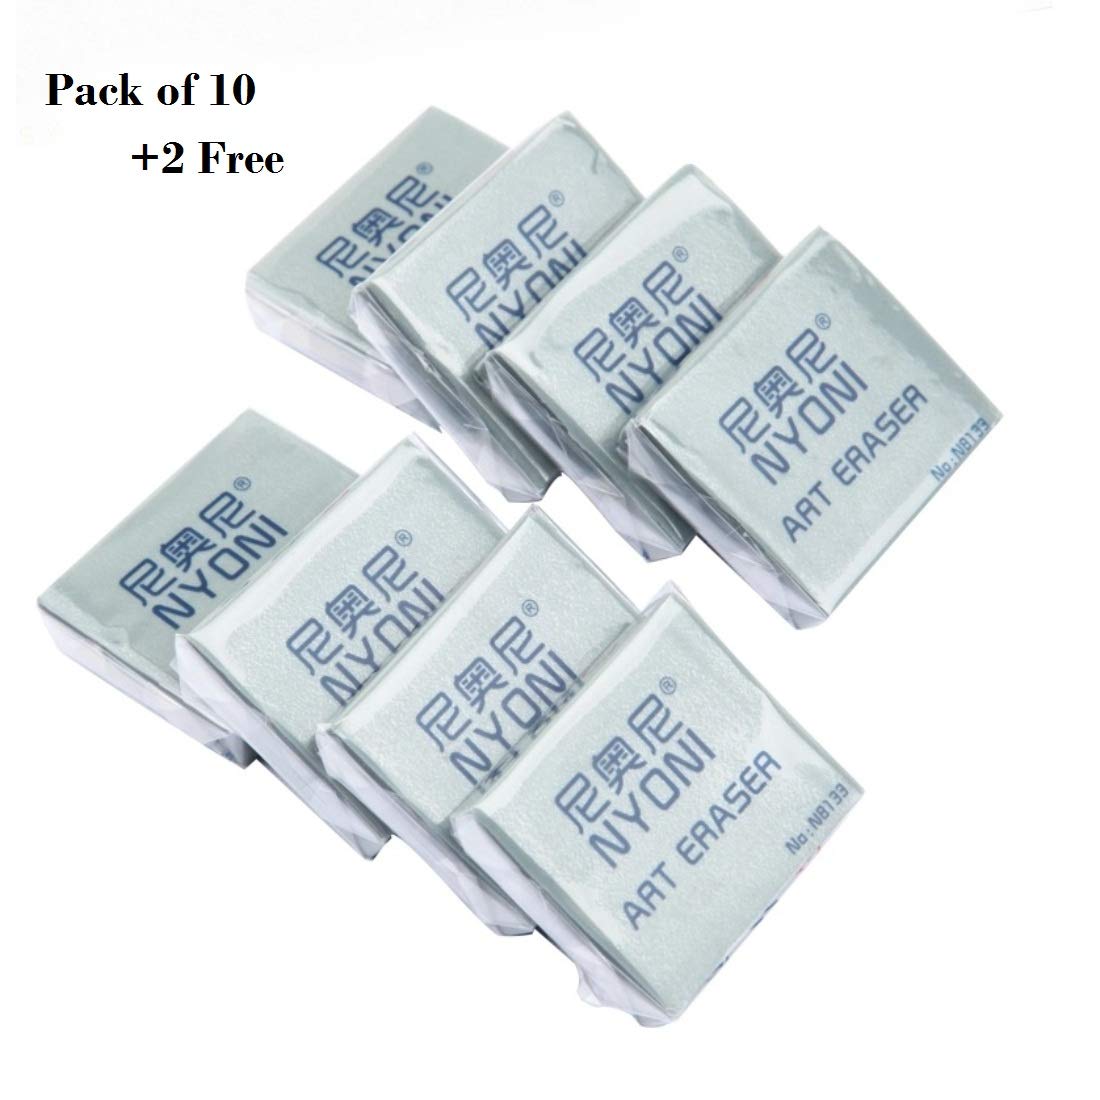 Ondesk Artics Artists' Soft Kneadable Eraser | Strong Adhesive Force | Essential For Lightening Or Correcting Chalk, Charcoal Or Graphite work | Perfect For Professional & Amateur Artists | Grey Color, Pack of 12